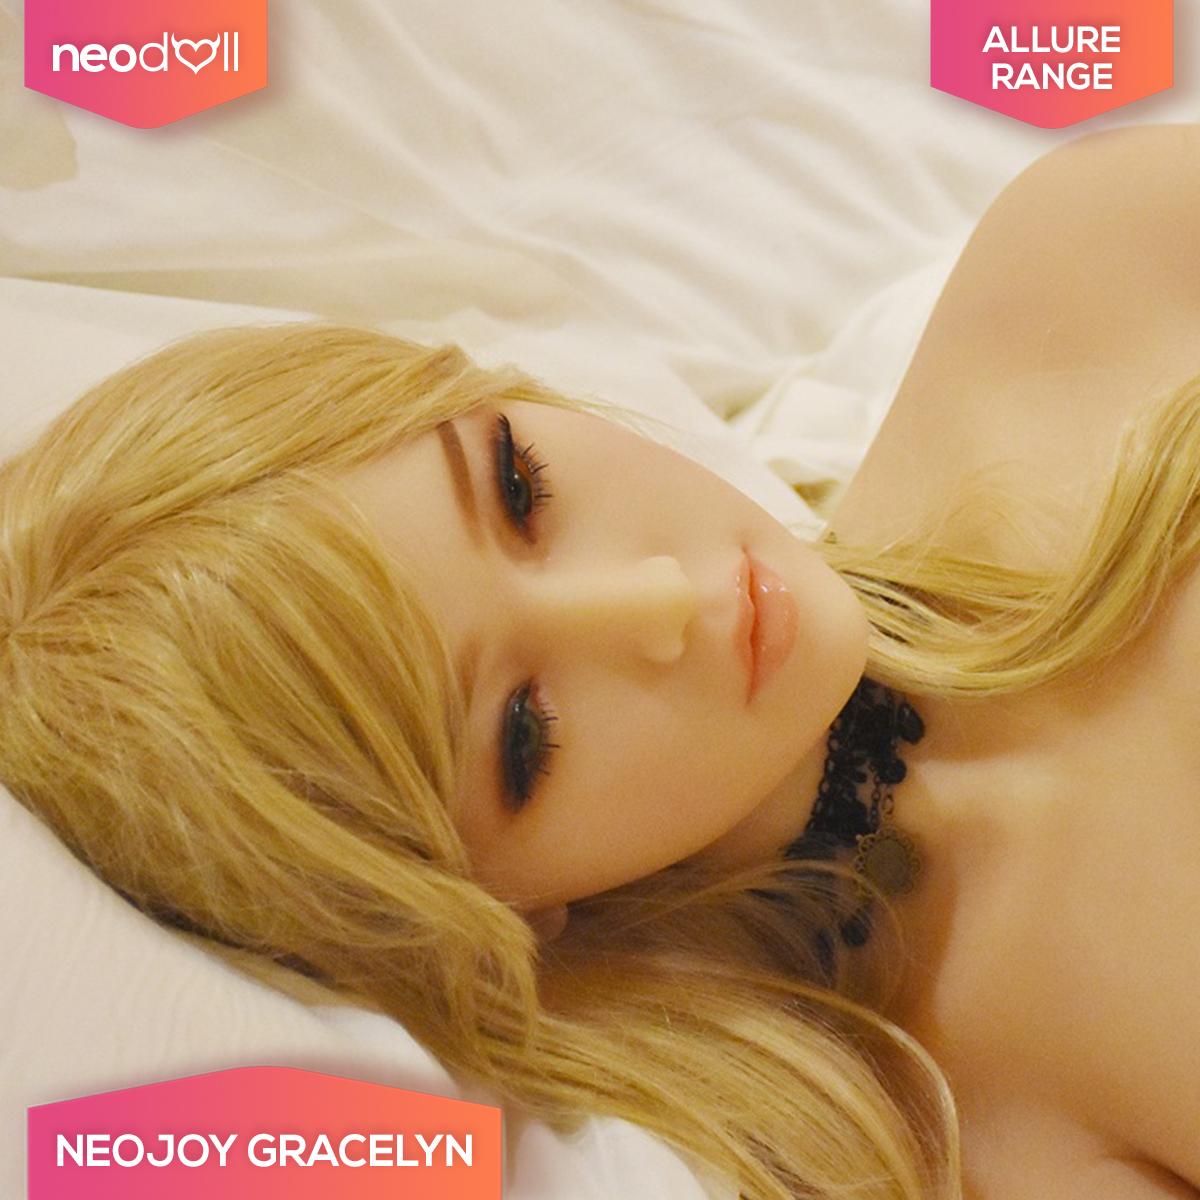 Neodoll Allure Gracelyn - Realistic Sex Doll - 170cm - Natural